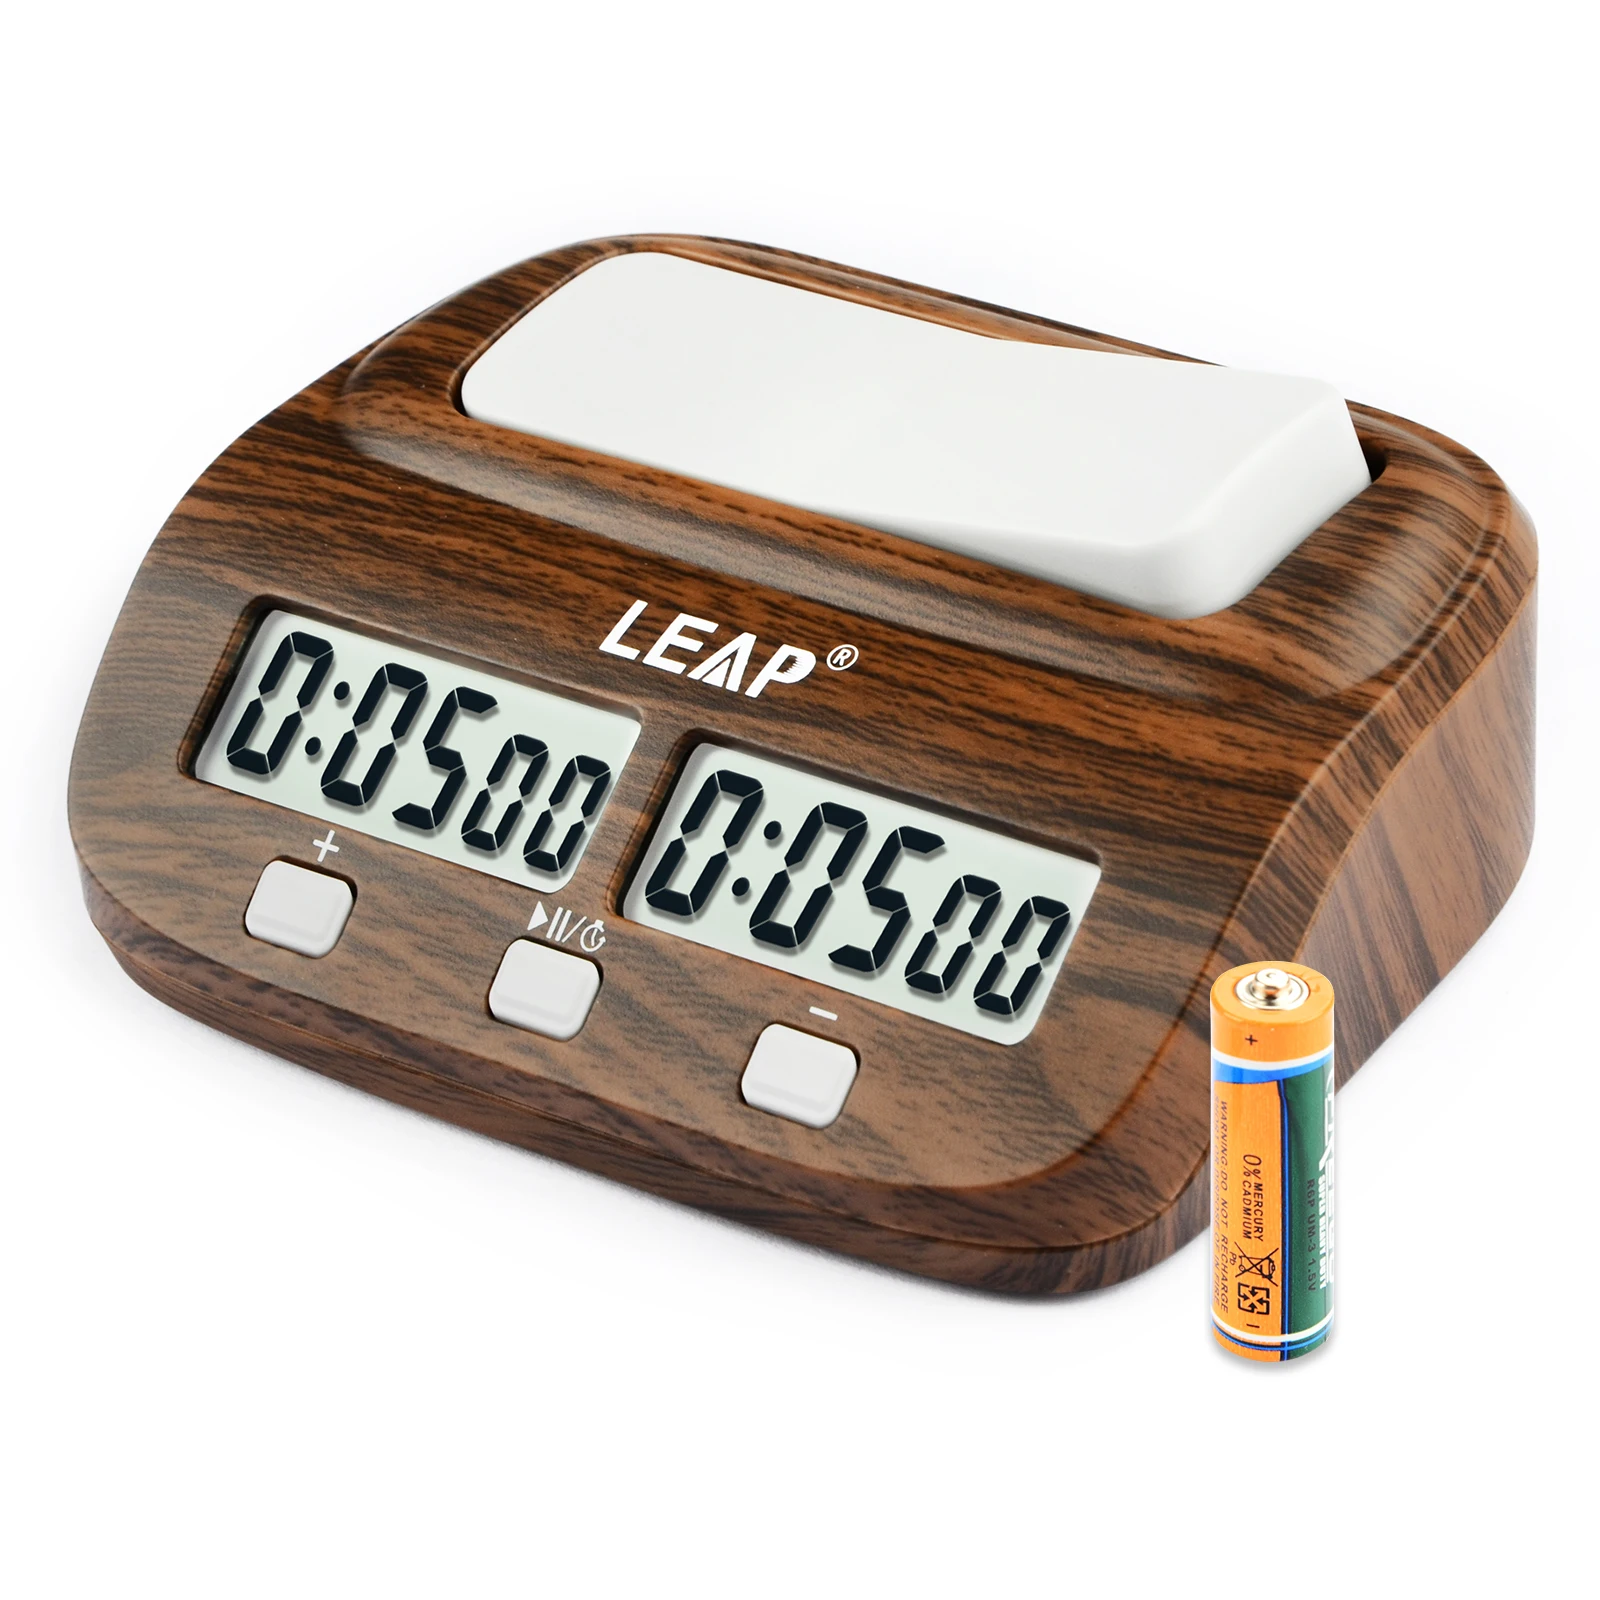 

LEAP Digital Easy chess clock with increment and delay PQ9907W in brown